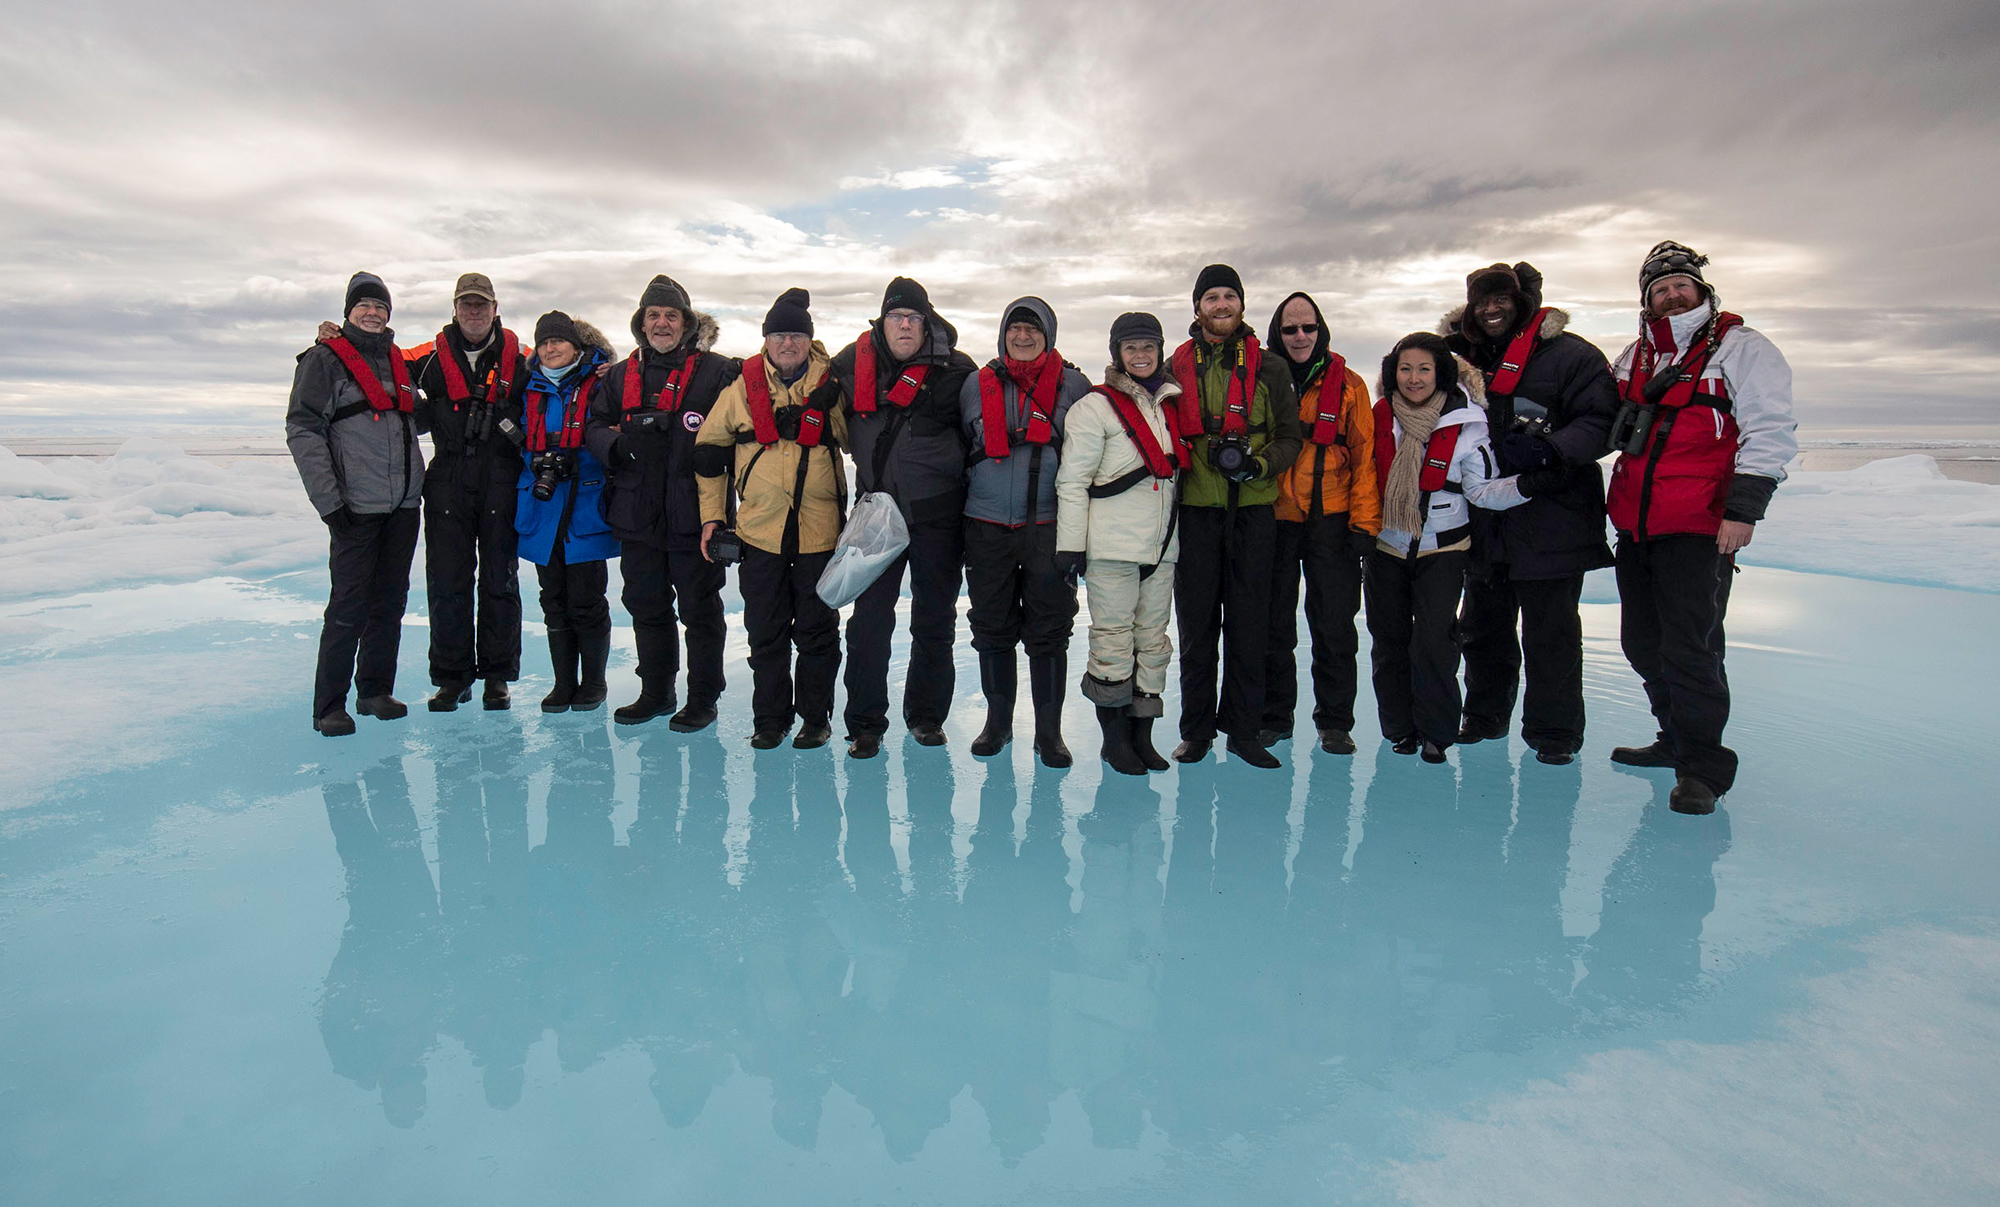 Group shot from a pre-COVID trip standing on an ice flow in the middle of the Arctic Ocean